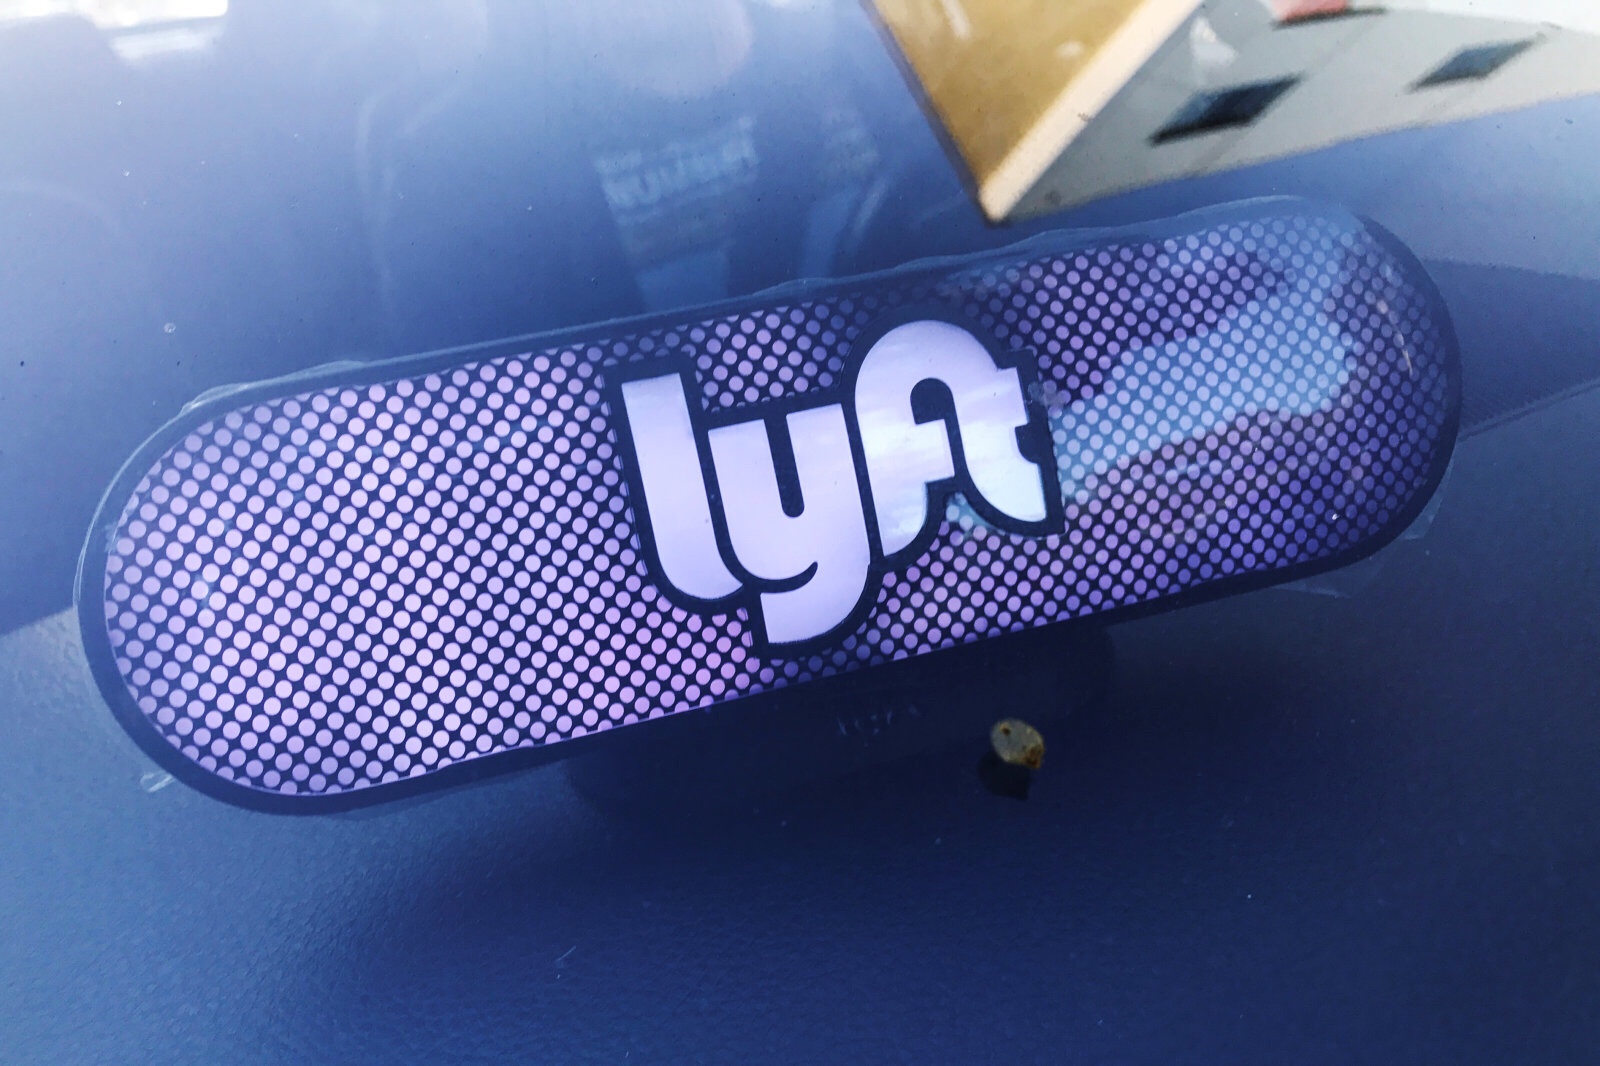 Lyft is investigating claims of staff abusing access to customer data